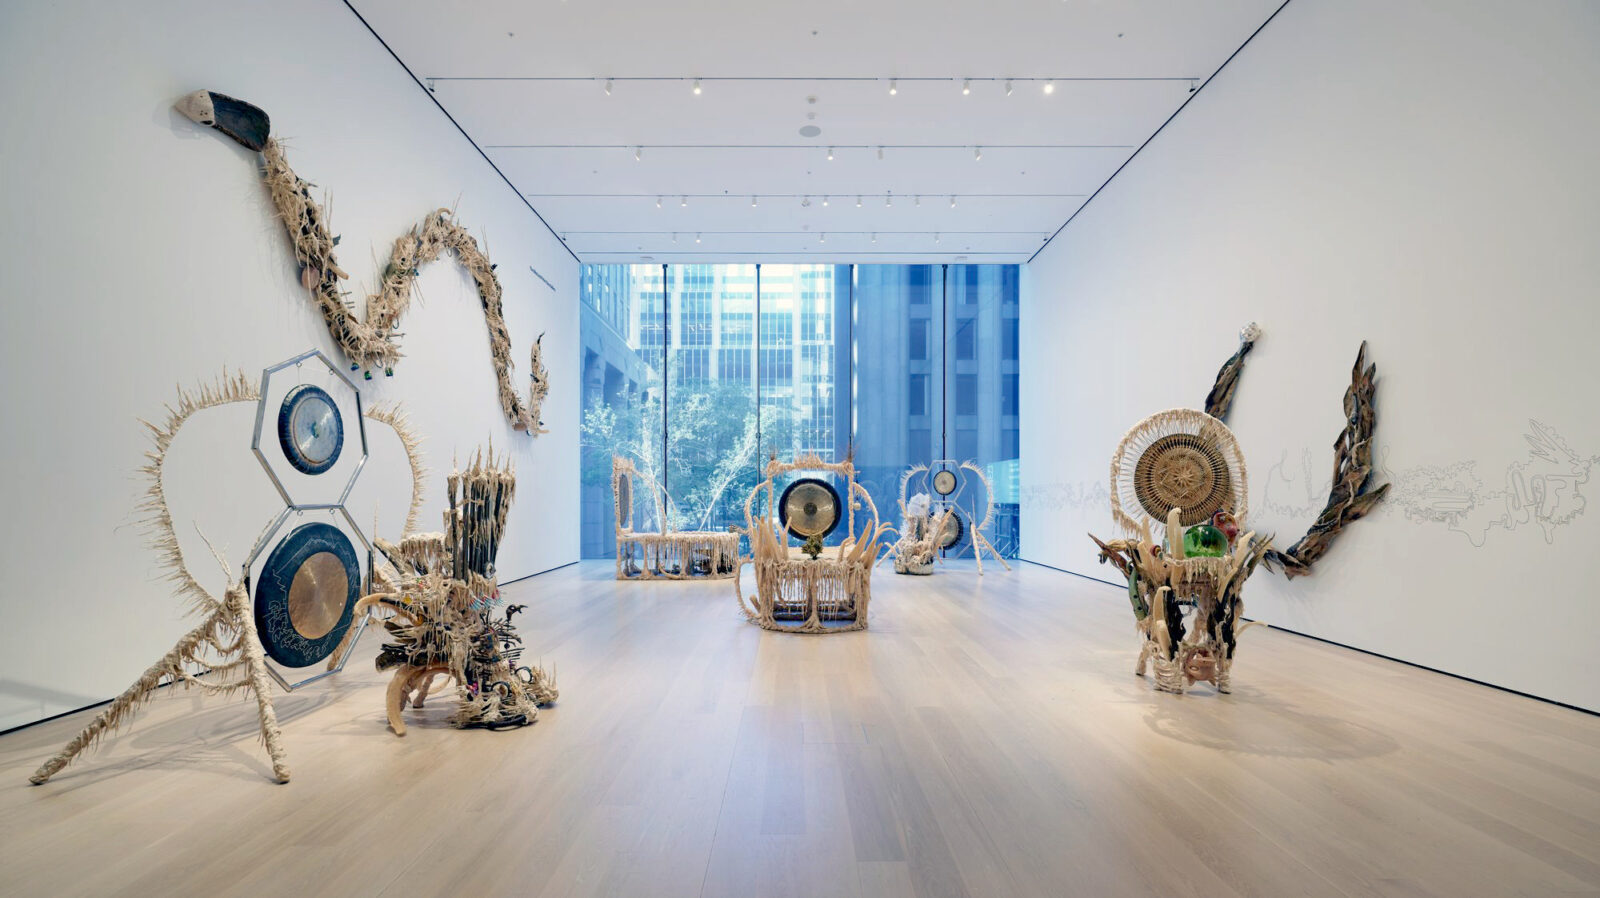 Installation still of Creative Capital Awardee Guadalupe Maravilla's Luz y fuerza at the Museum of Modern Art, New York. On view through Fall 2022.